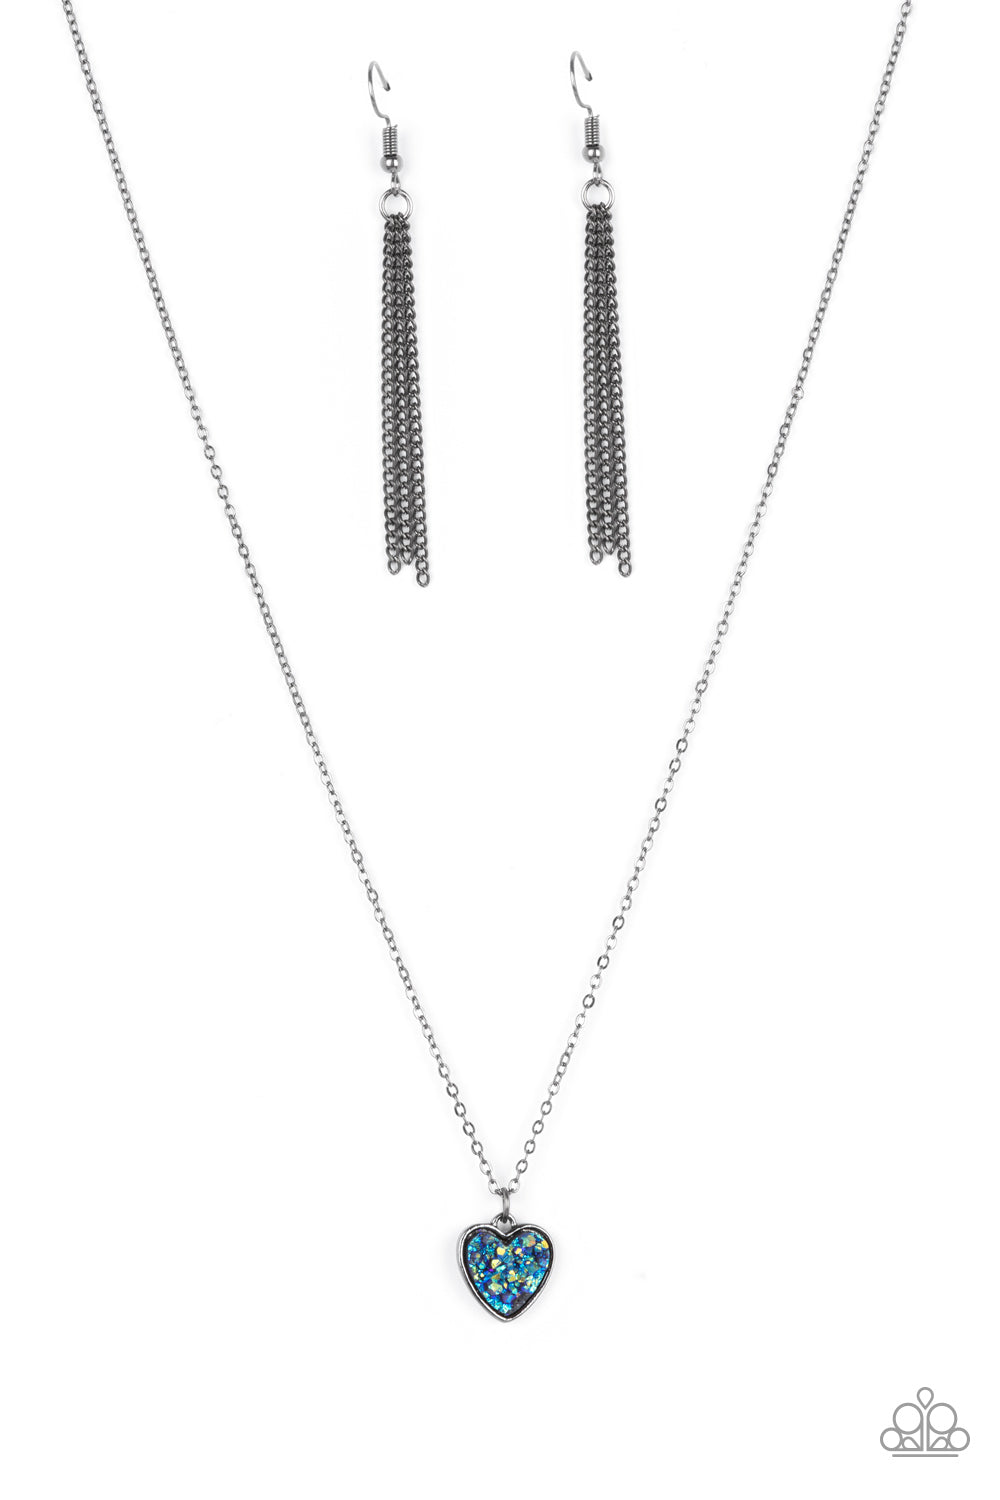 Pitter-Patter, Goes My Heart - Blue - Paparazzi Necklace